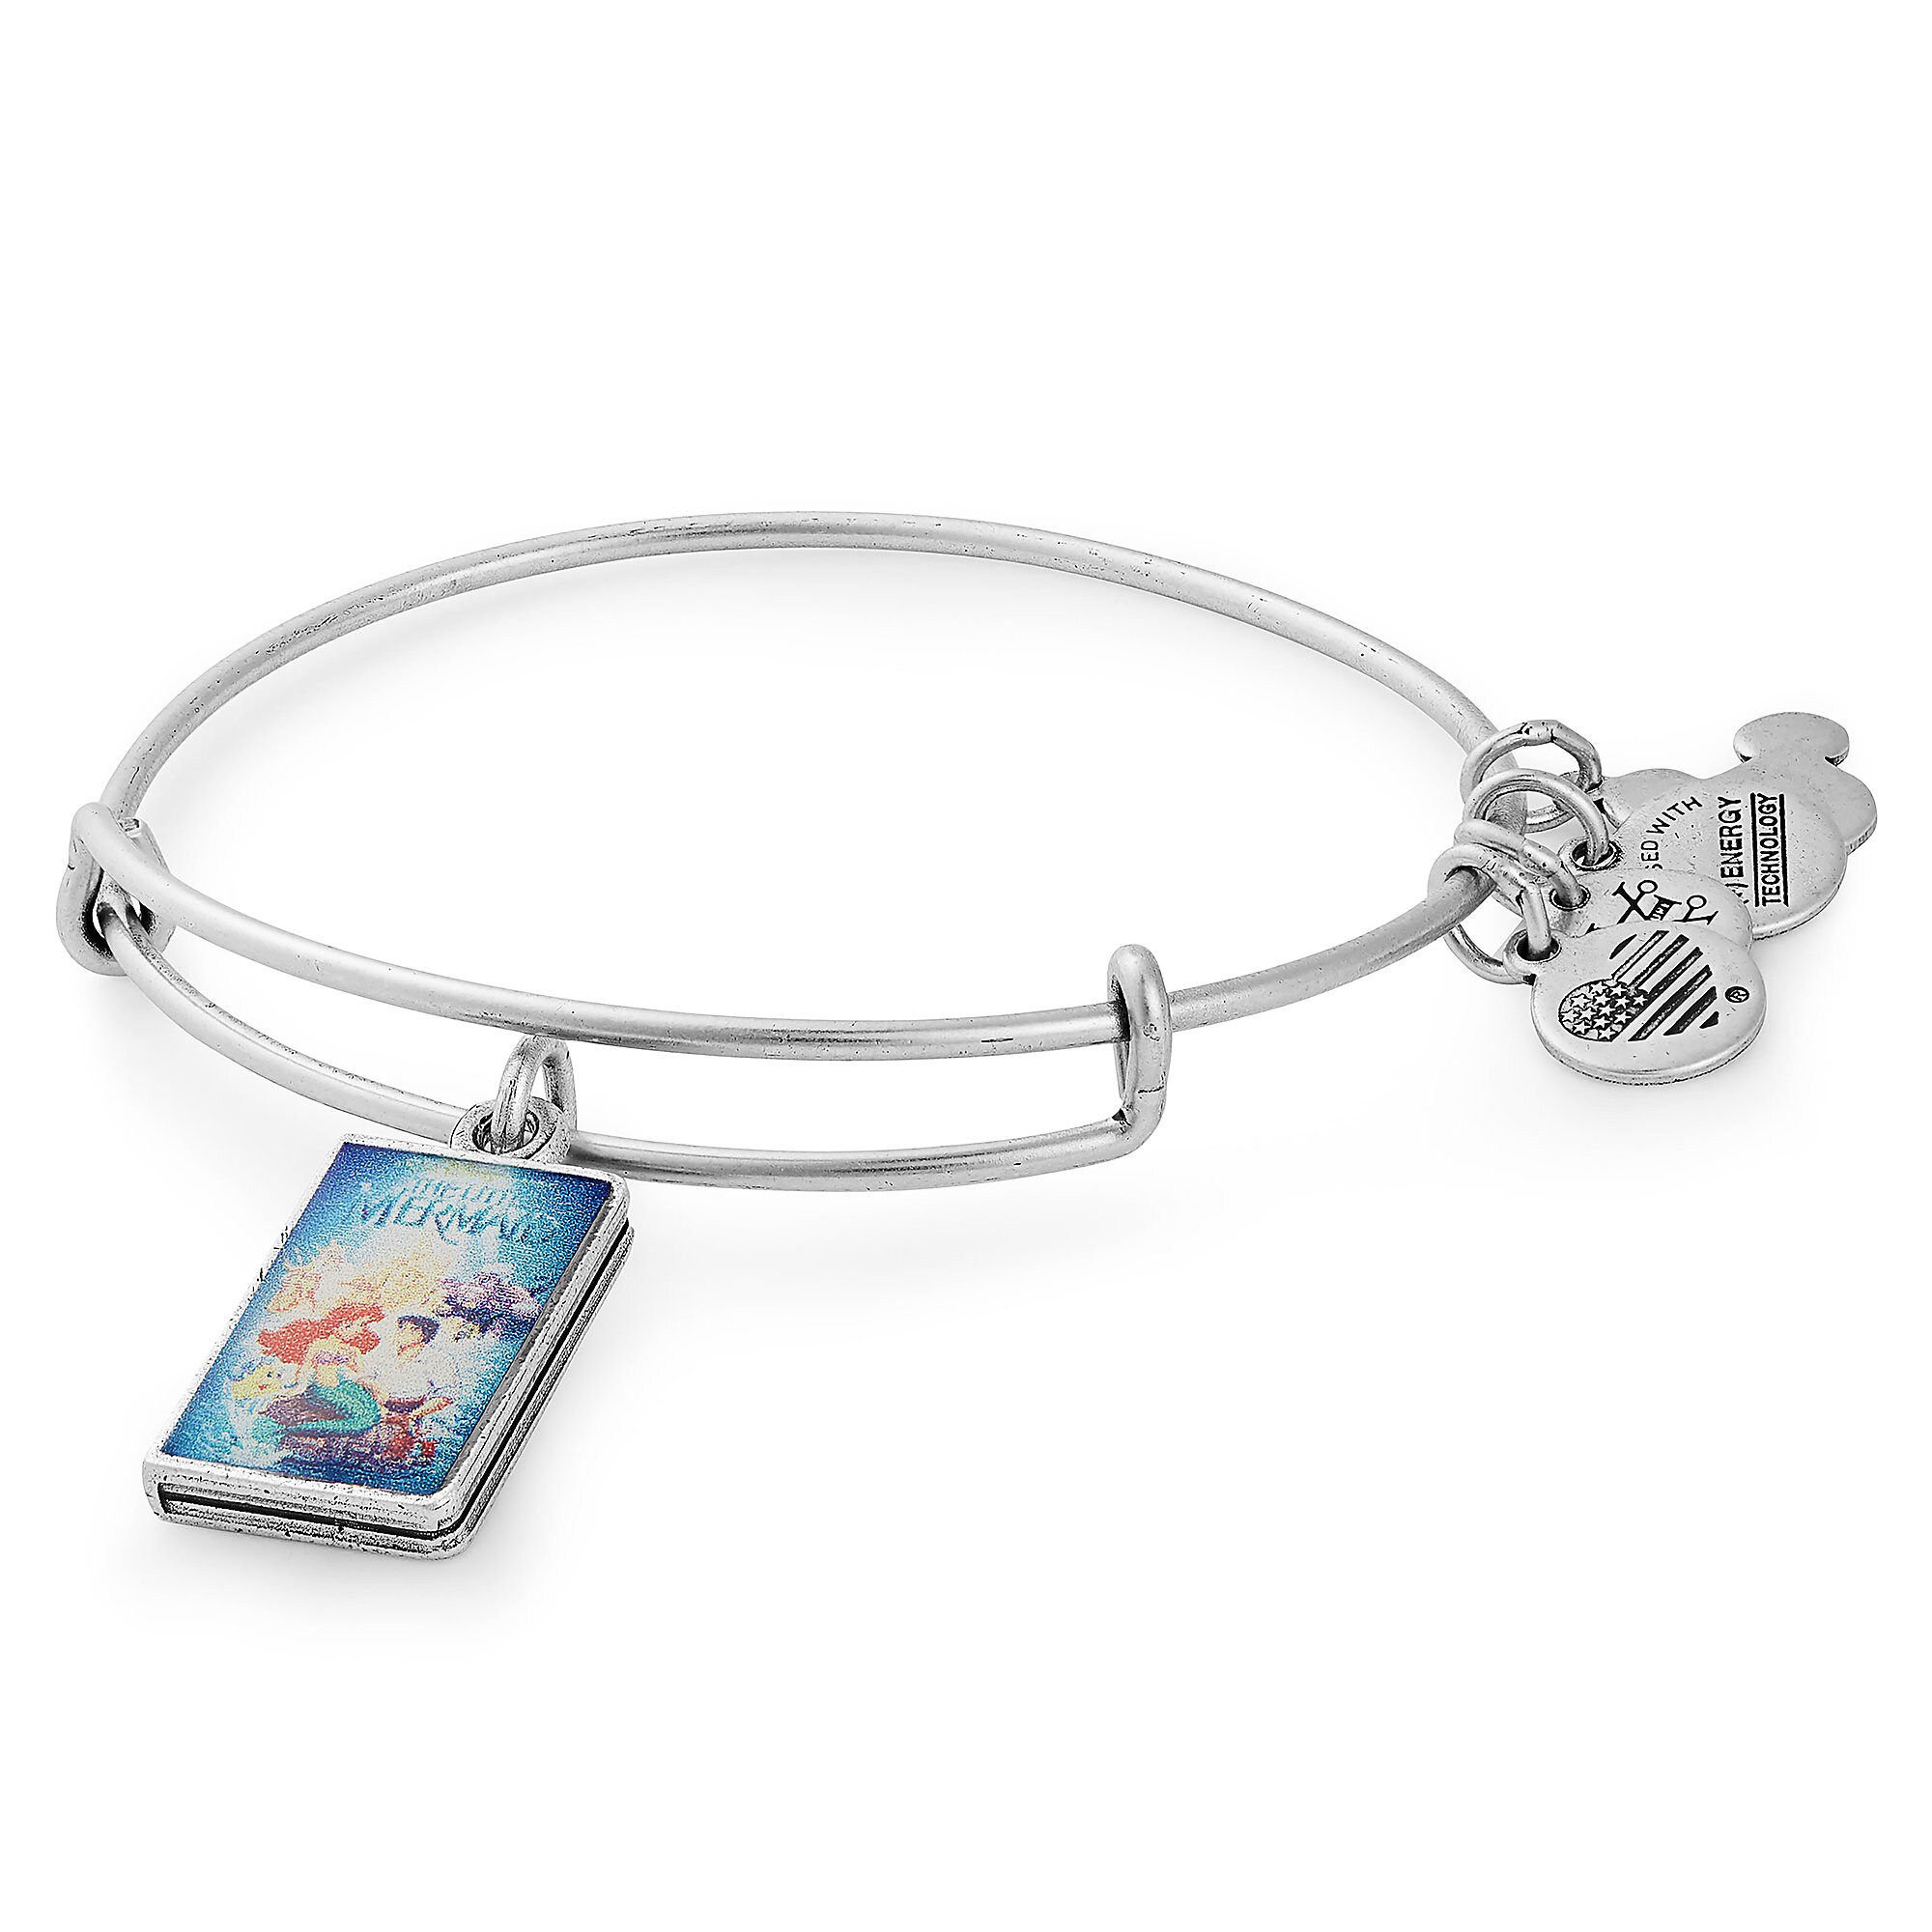 The Little Mermaid ''VHS Case'' Bangle by Alex and Ani